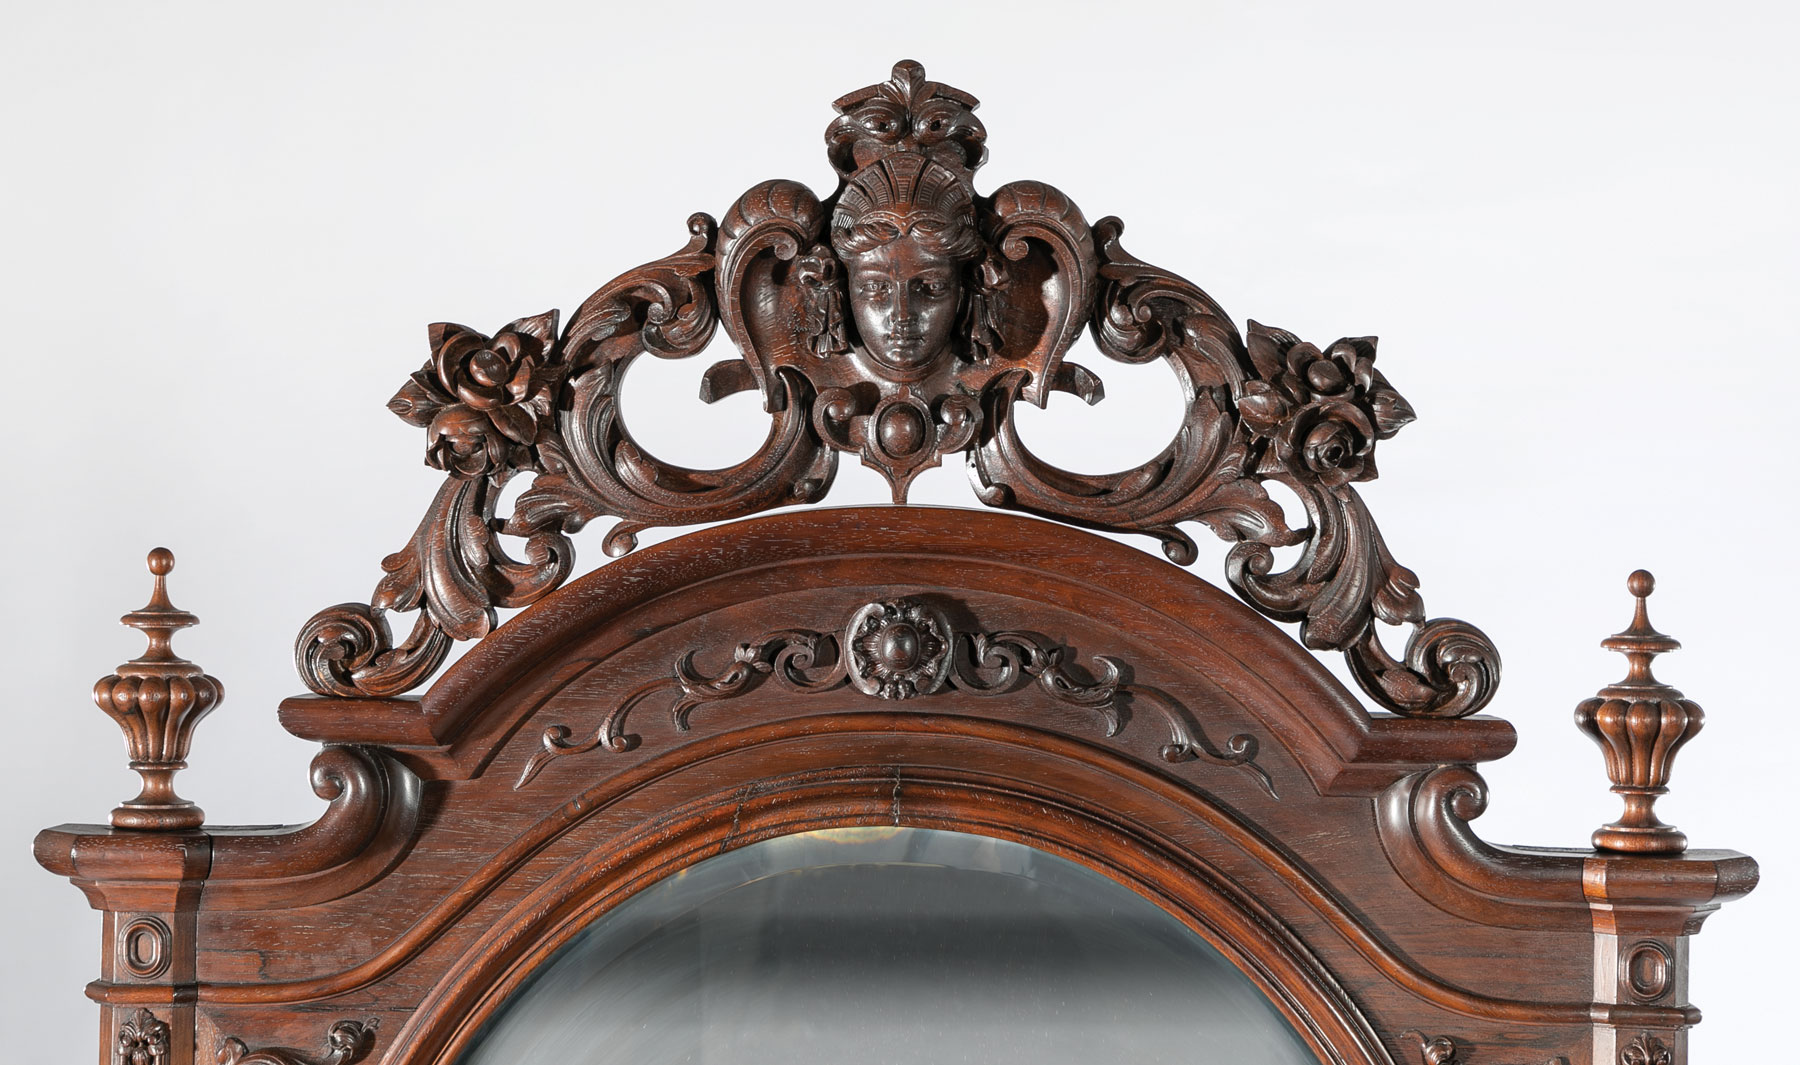 Very Fine American Carved Rosewood Bedroom Suite , mid-19th c., labeled A. (Alexander) Roux, incl. - Image 5 of 20